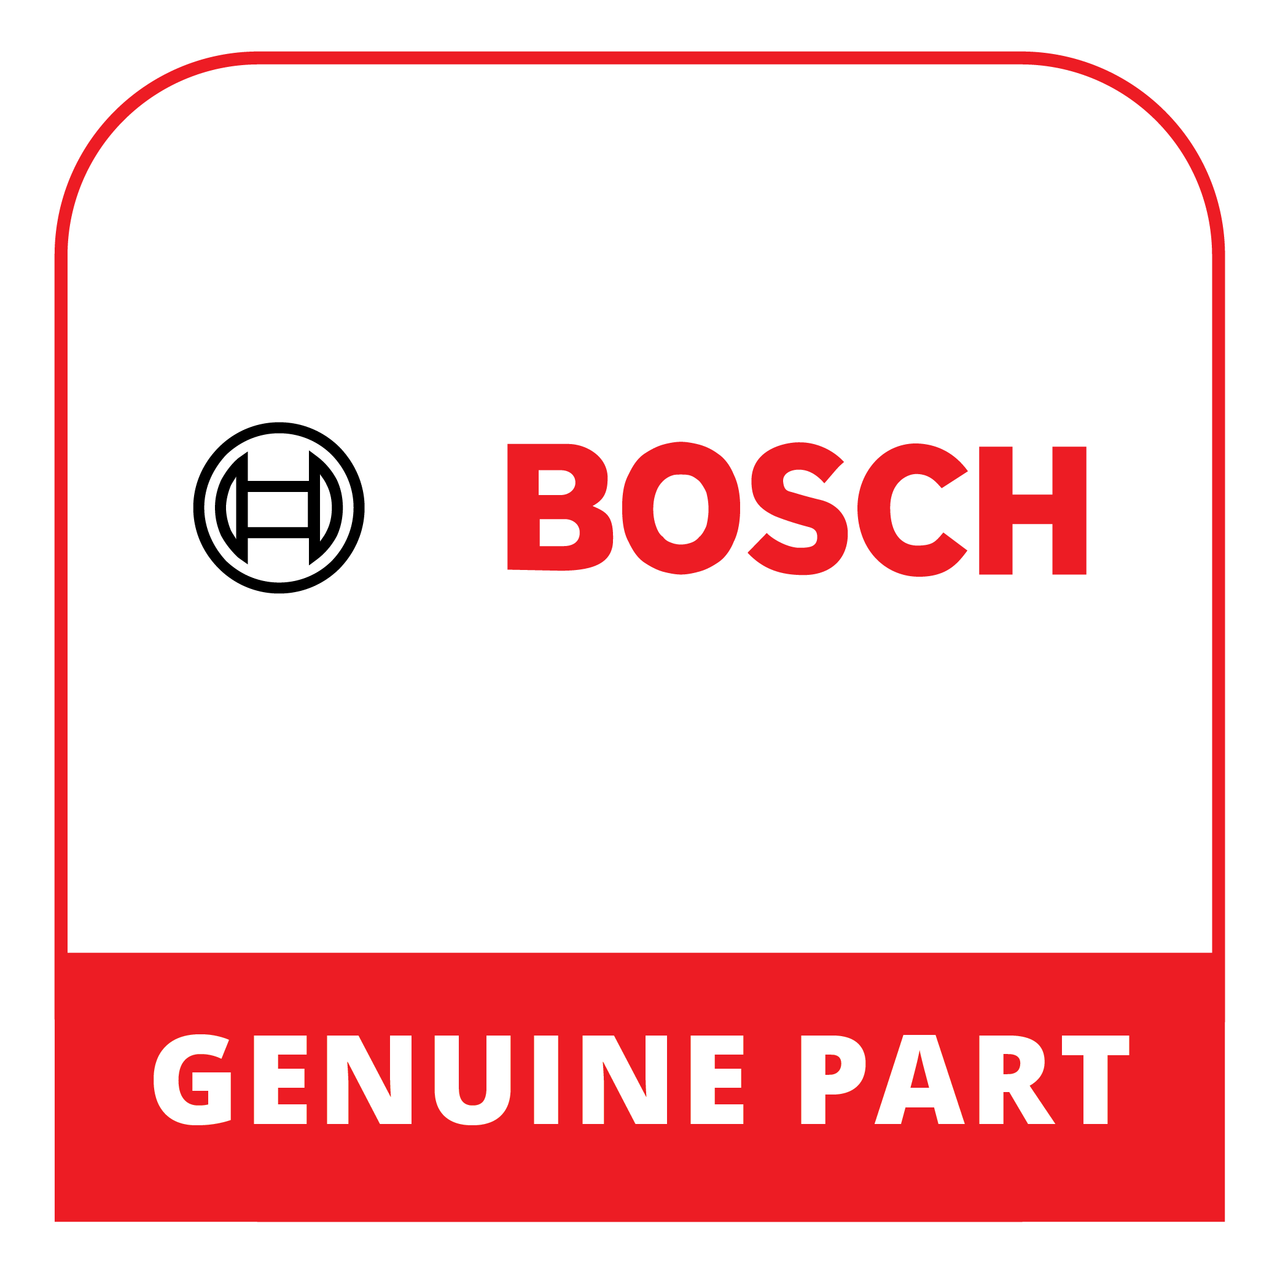 Bosch (Thermador) 12040075 - Funnel - Genuine Bosch (Thermador) Part